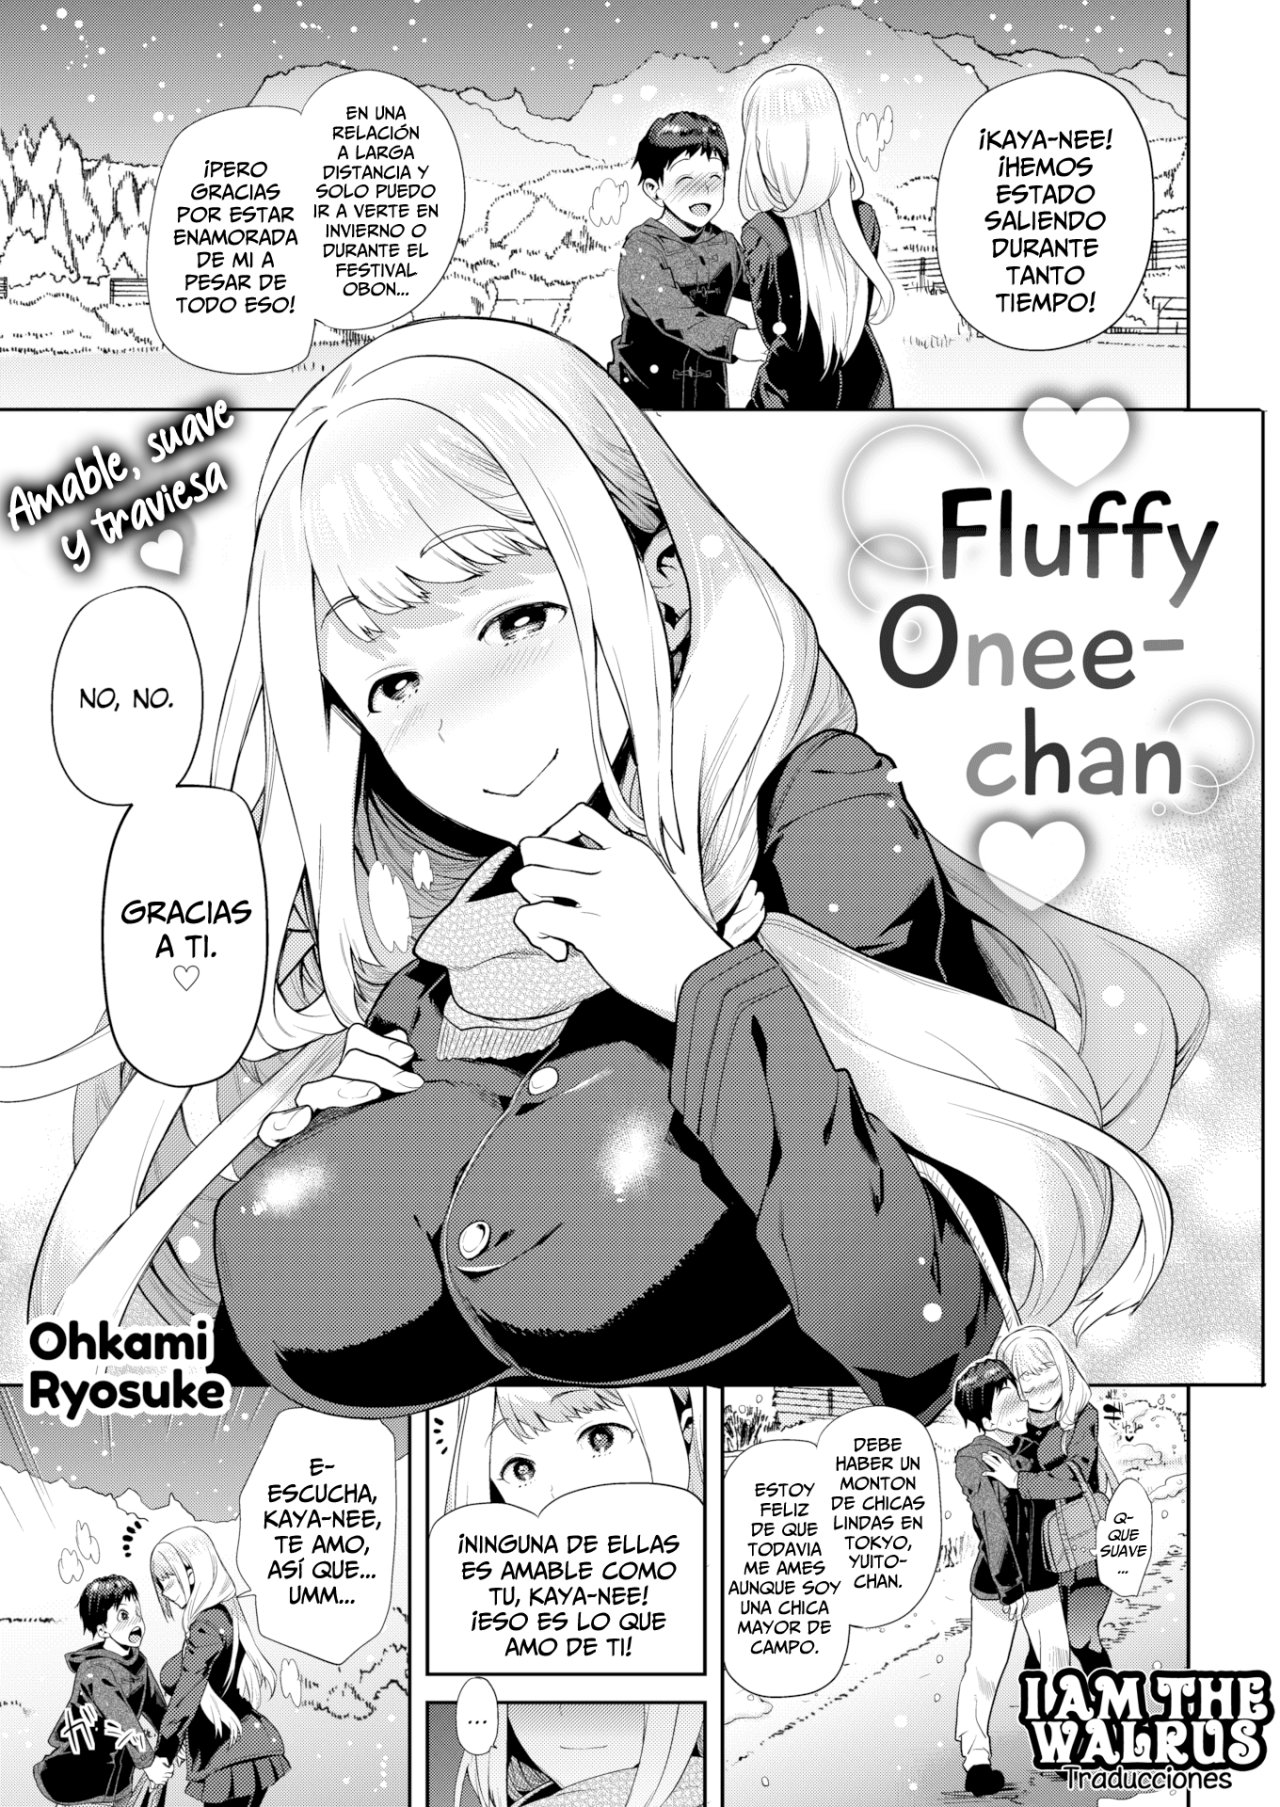 Fluffy Onee-chan - 1